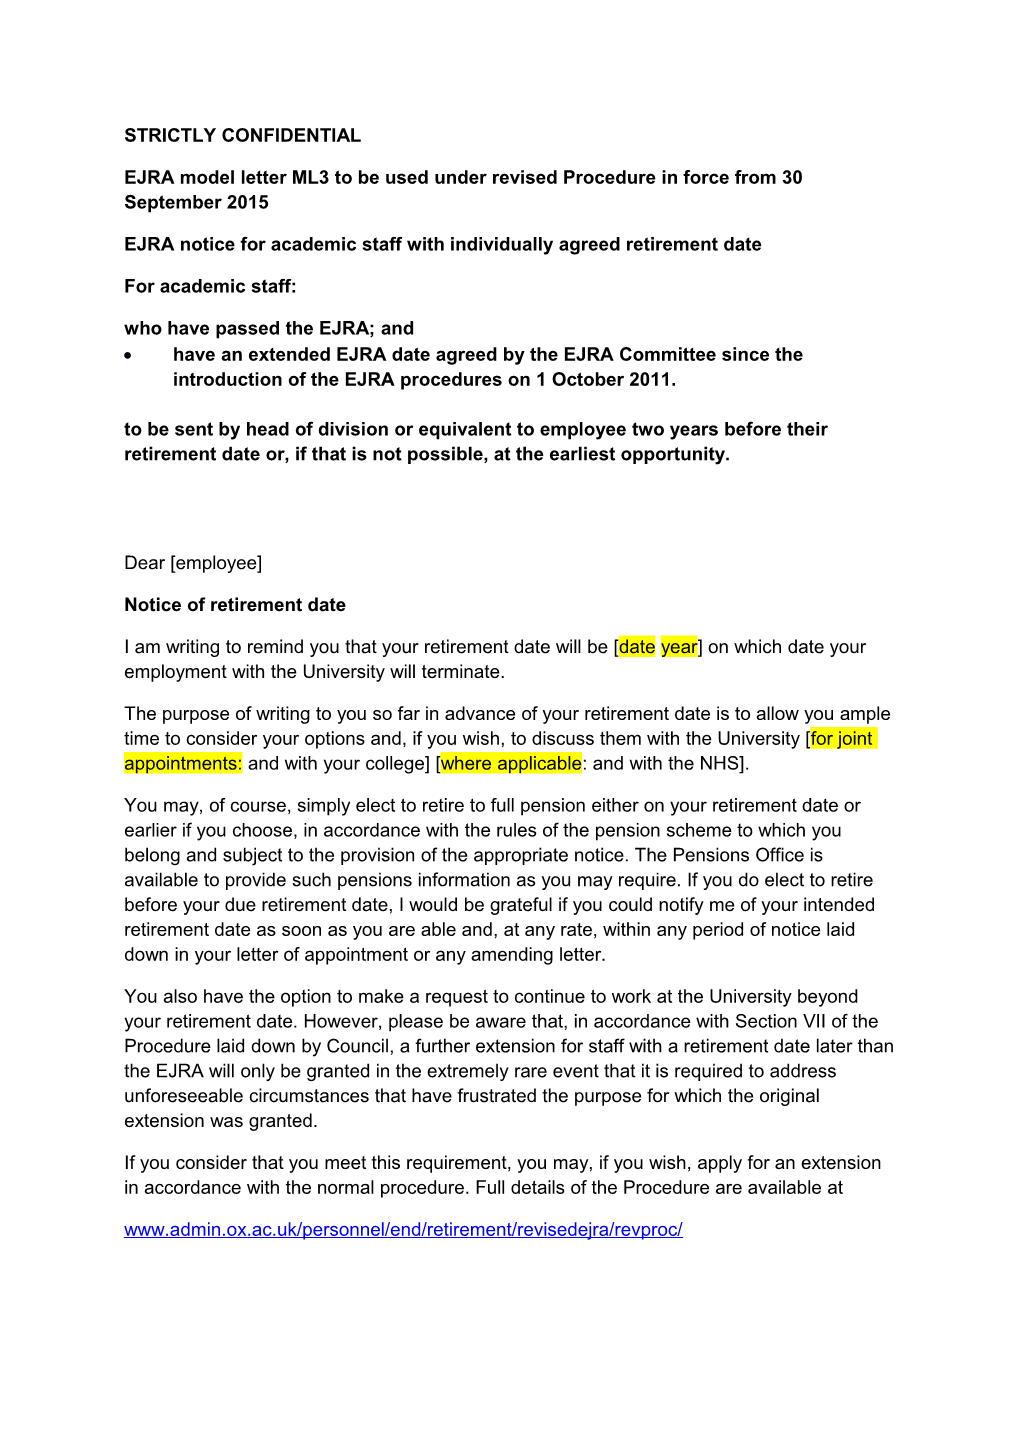 EJRA Notice for Academic Staff with Individually Agreed Retirement Date